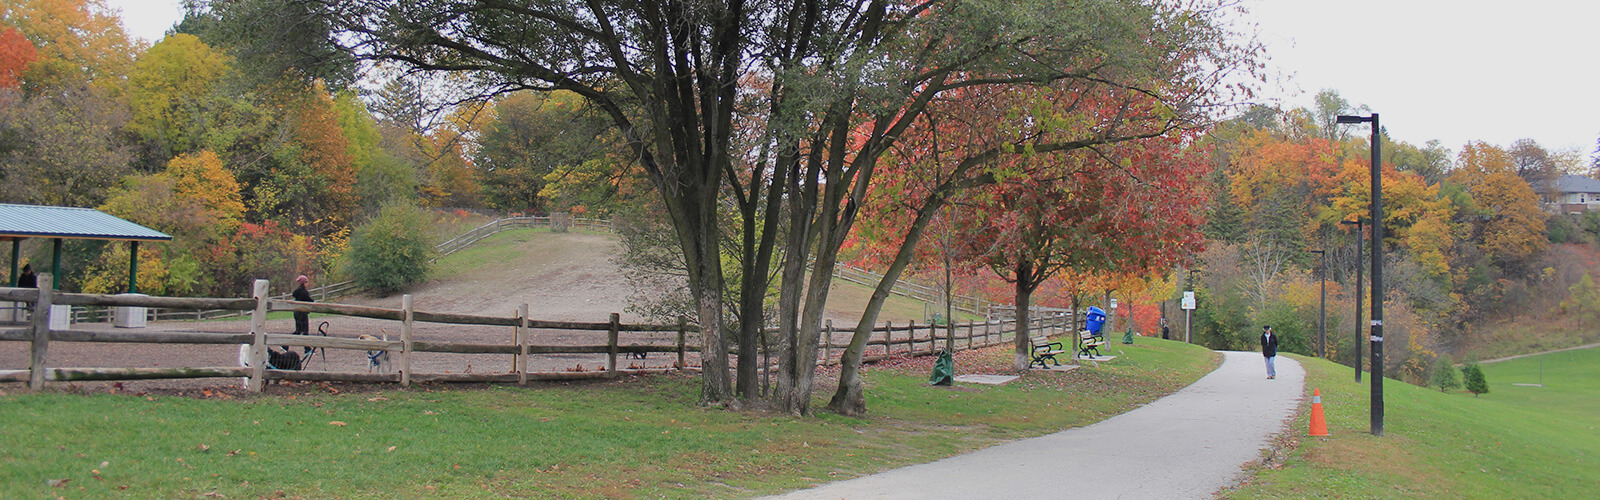 A paved path runs parallel to a dog park in the fall